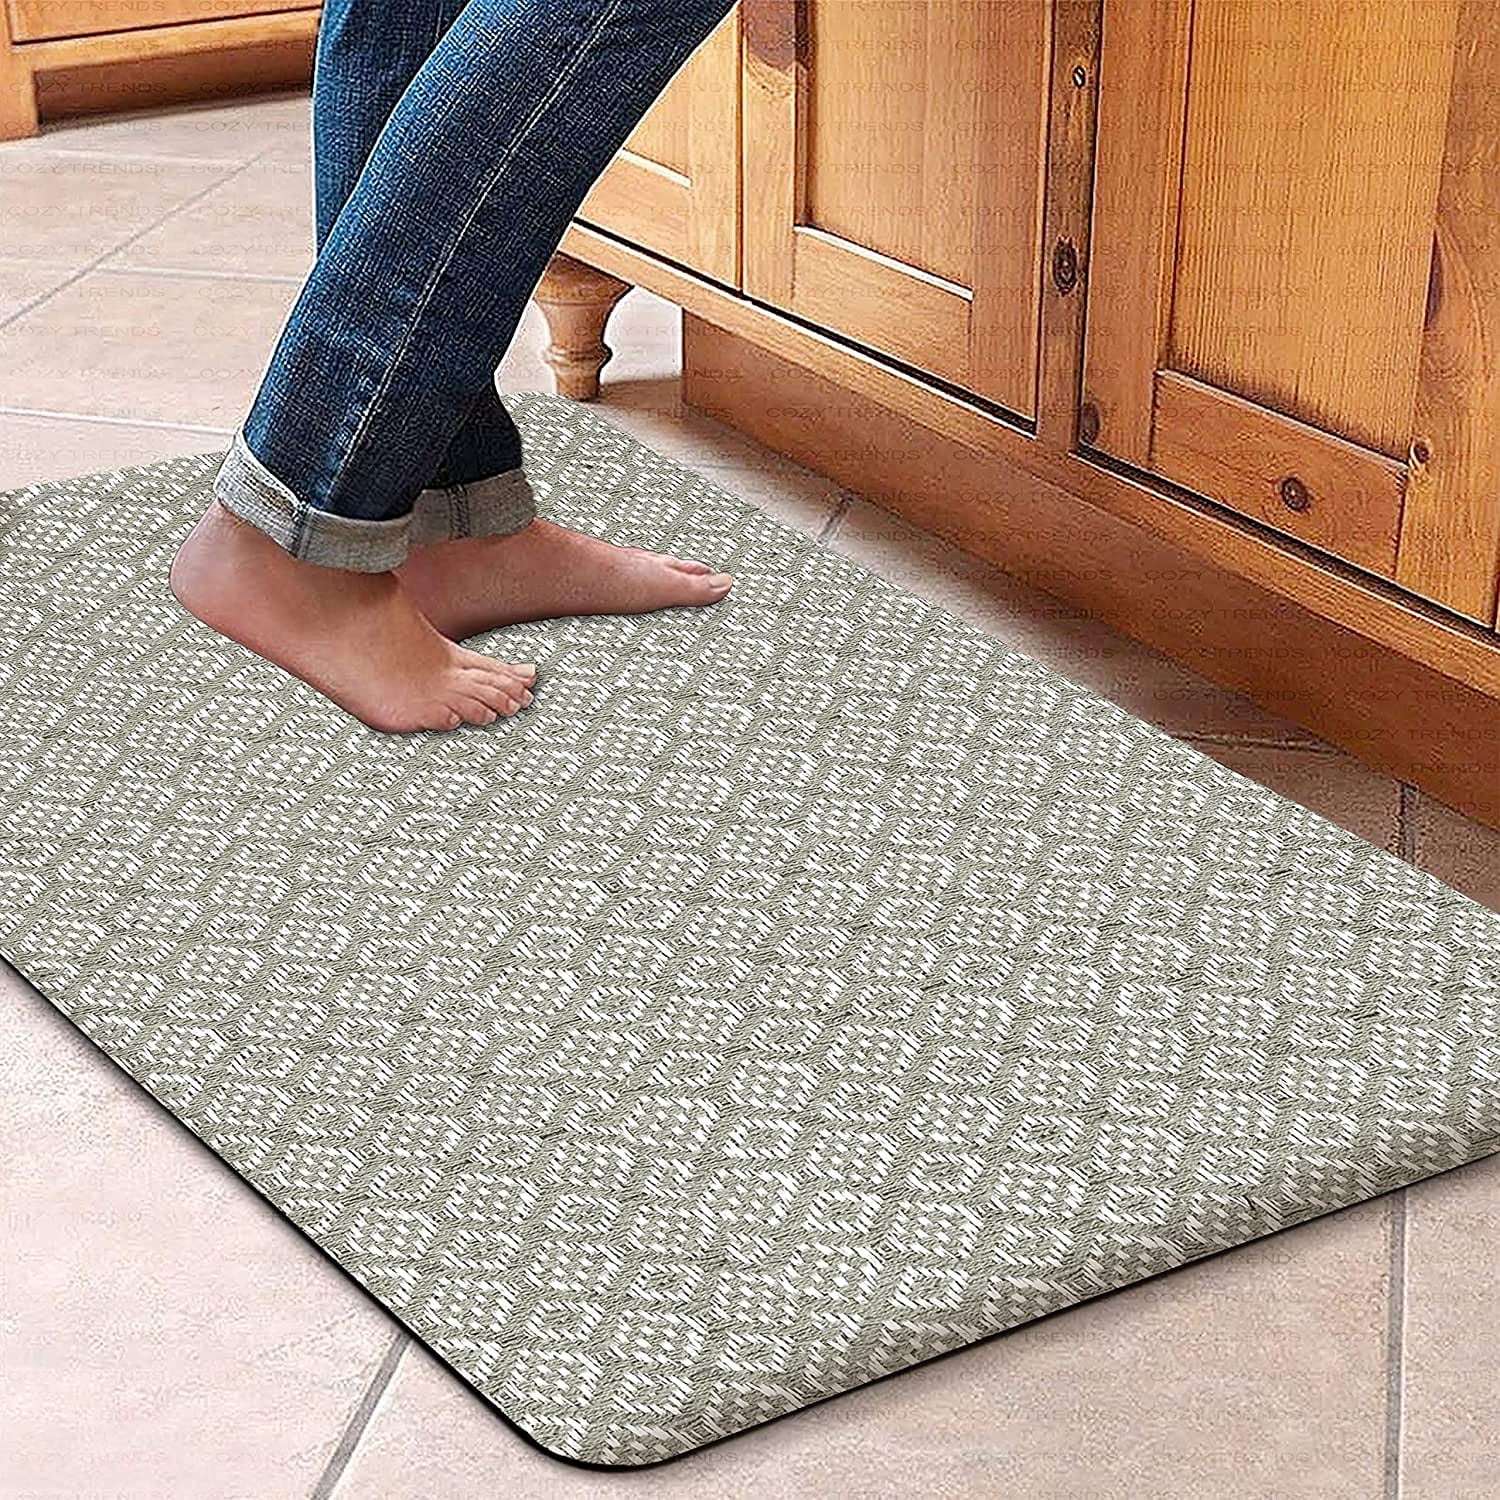 https://ak1.ostkcdn.com/images/products/is/images/direct/7ad8f9f0d8f2d30e4f4db0dcea76dd69af059fe3/Cotton-Kitchen-Mat-Cushioned-Anti-Fatigue-Rug%2C-Non-Slip-Mats-Comfort-Foam-Rug-for-Kitchen%2C-Office%2C-Sink%2C-Laundry---18%27%27x30%27%27.jpg